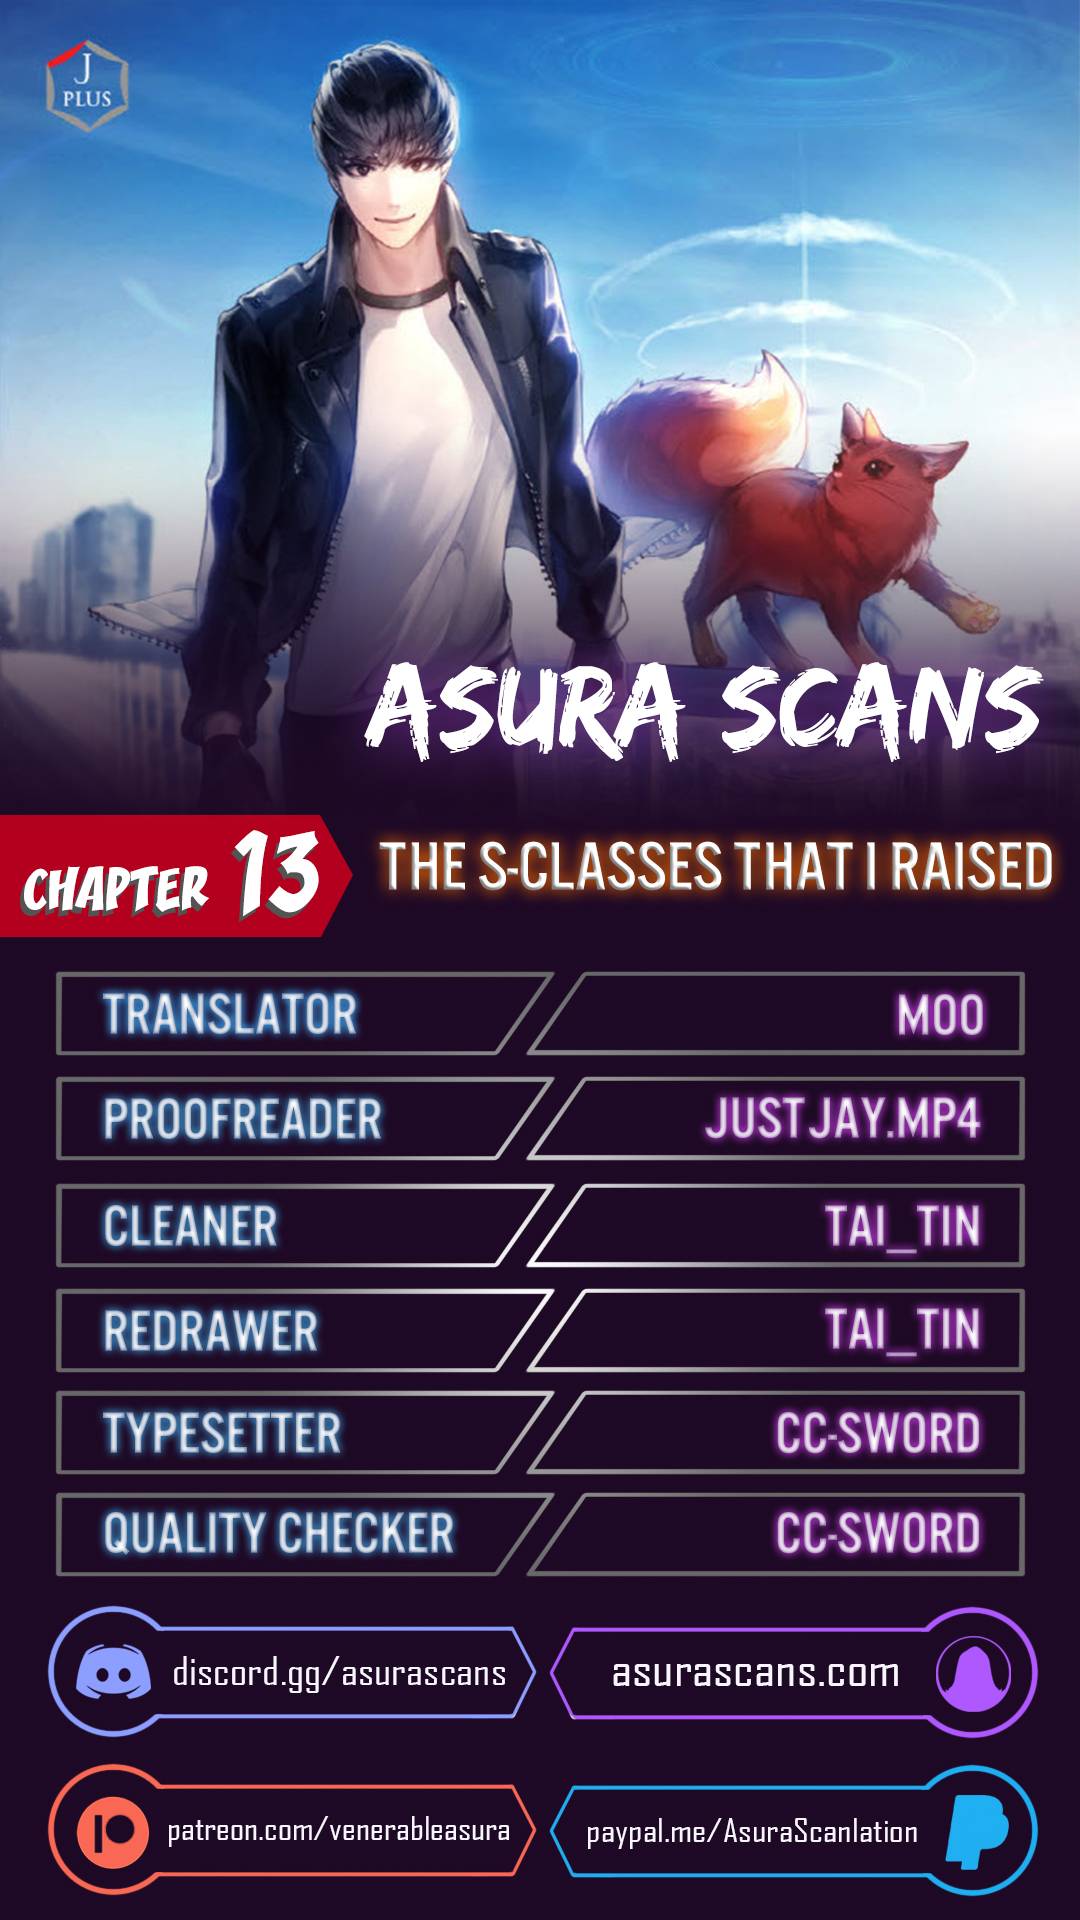 The S-Classes That I Raised chapter 13